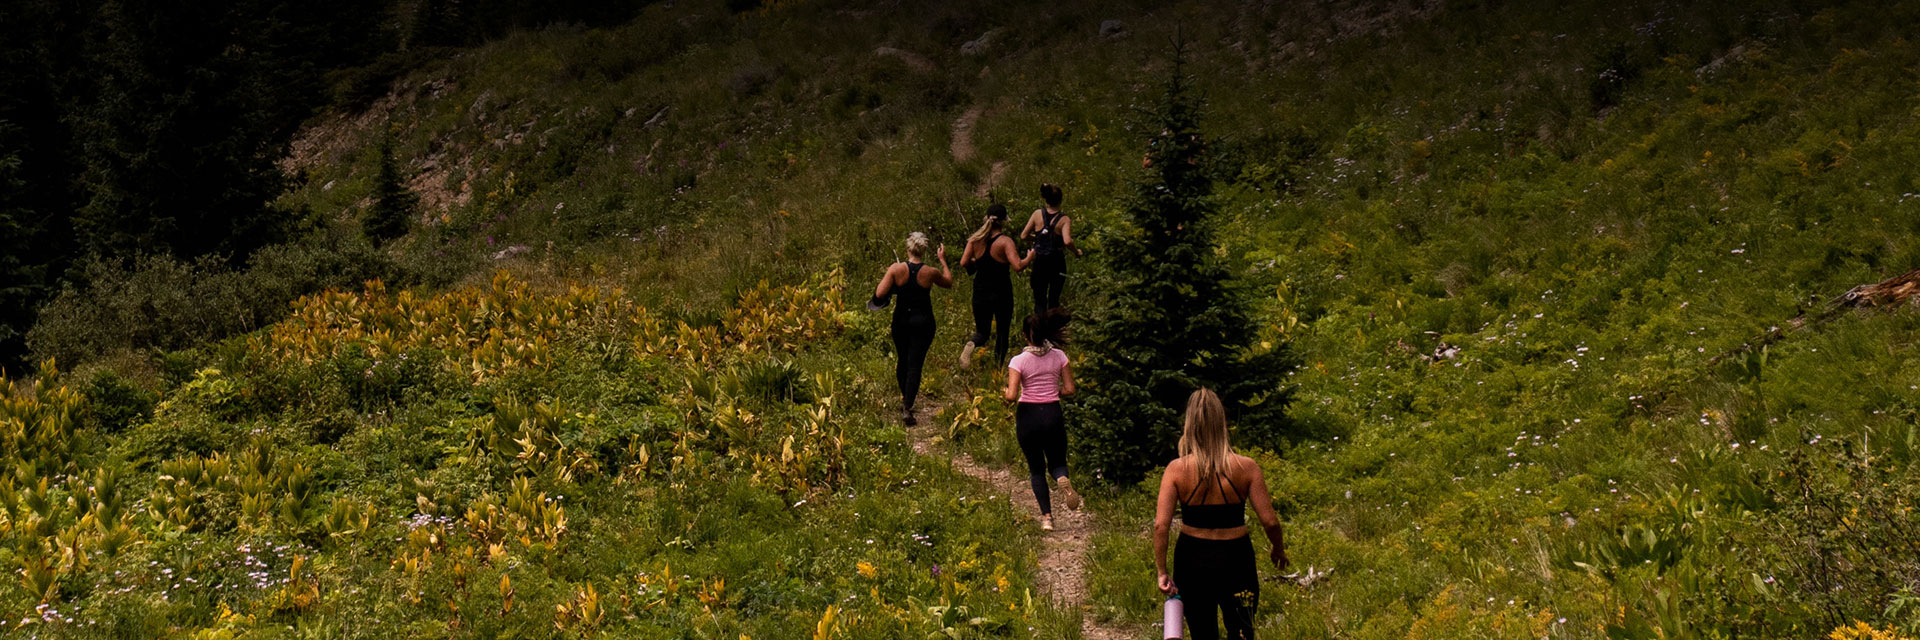 a group of women walking along a dirt trail surrounded by lush green landscape